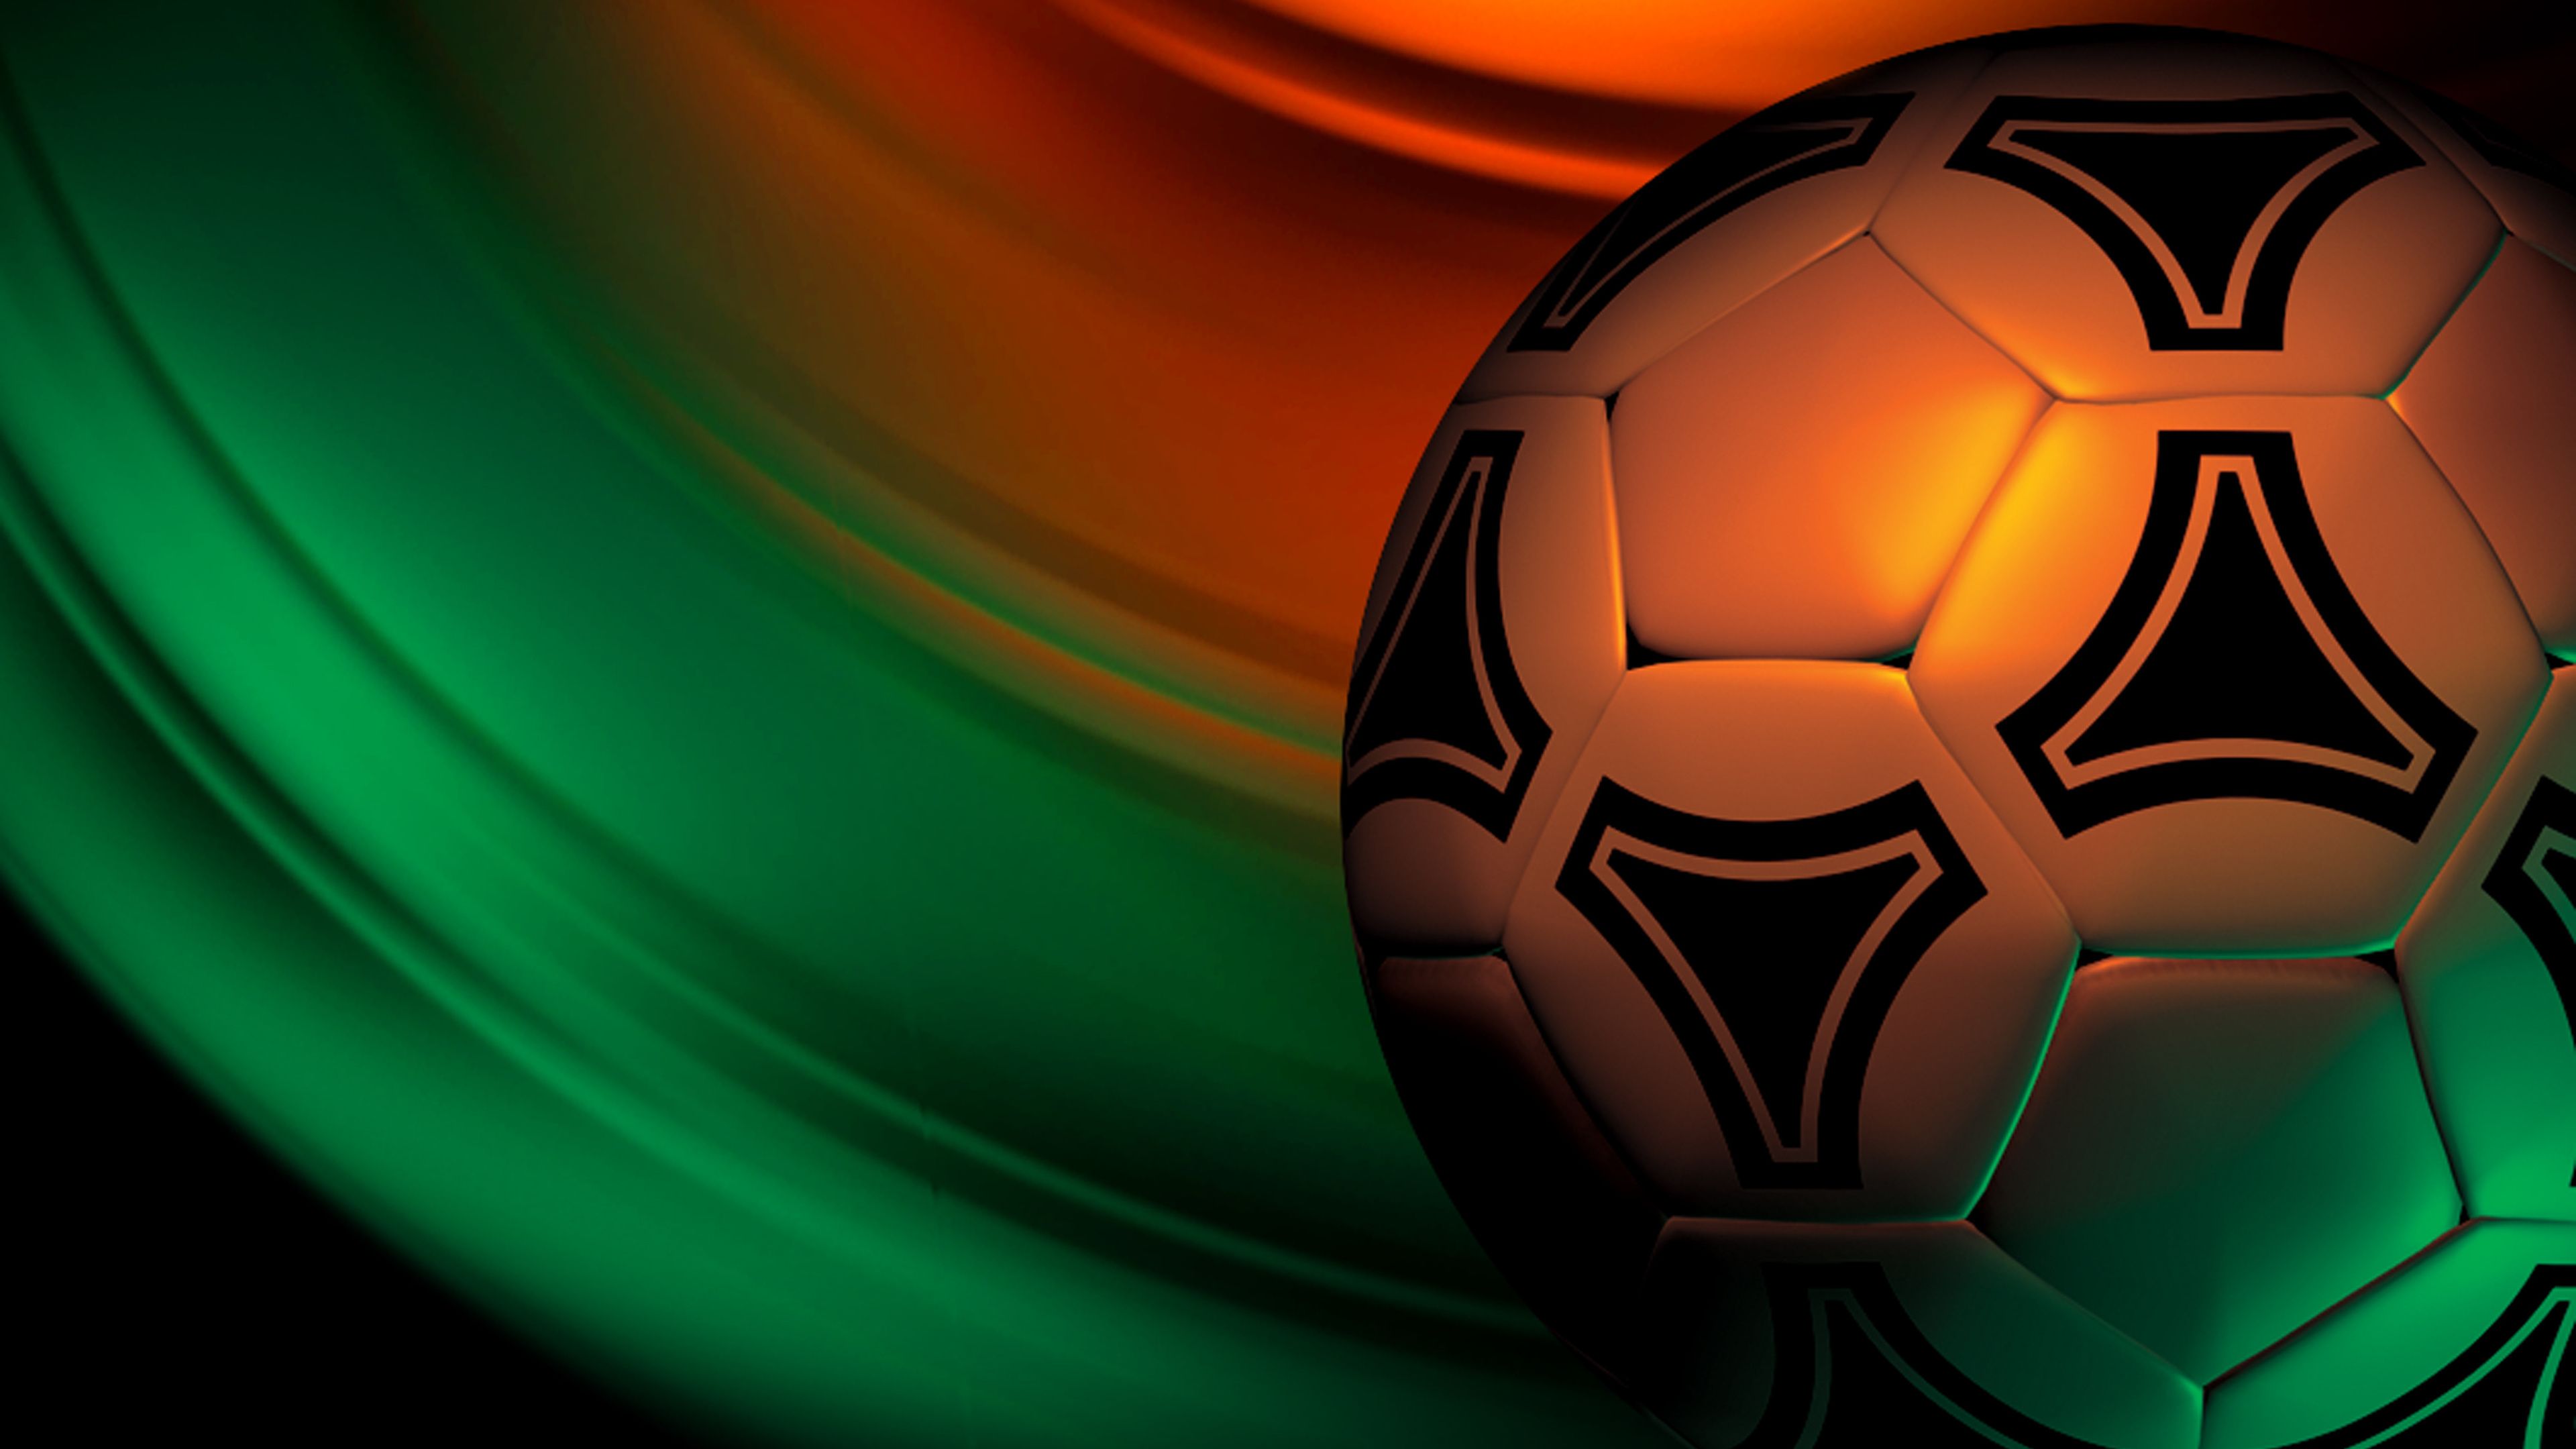 Soccer 4k Abstract Background sports wallpaper, soccer wallpaper, hd- wallpaper, abstract wallpaper. Abstract wallpaper, Abstract background, Sports wallpaper